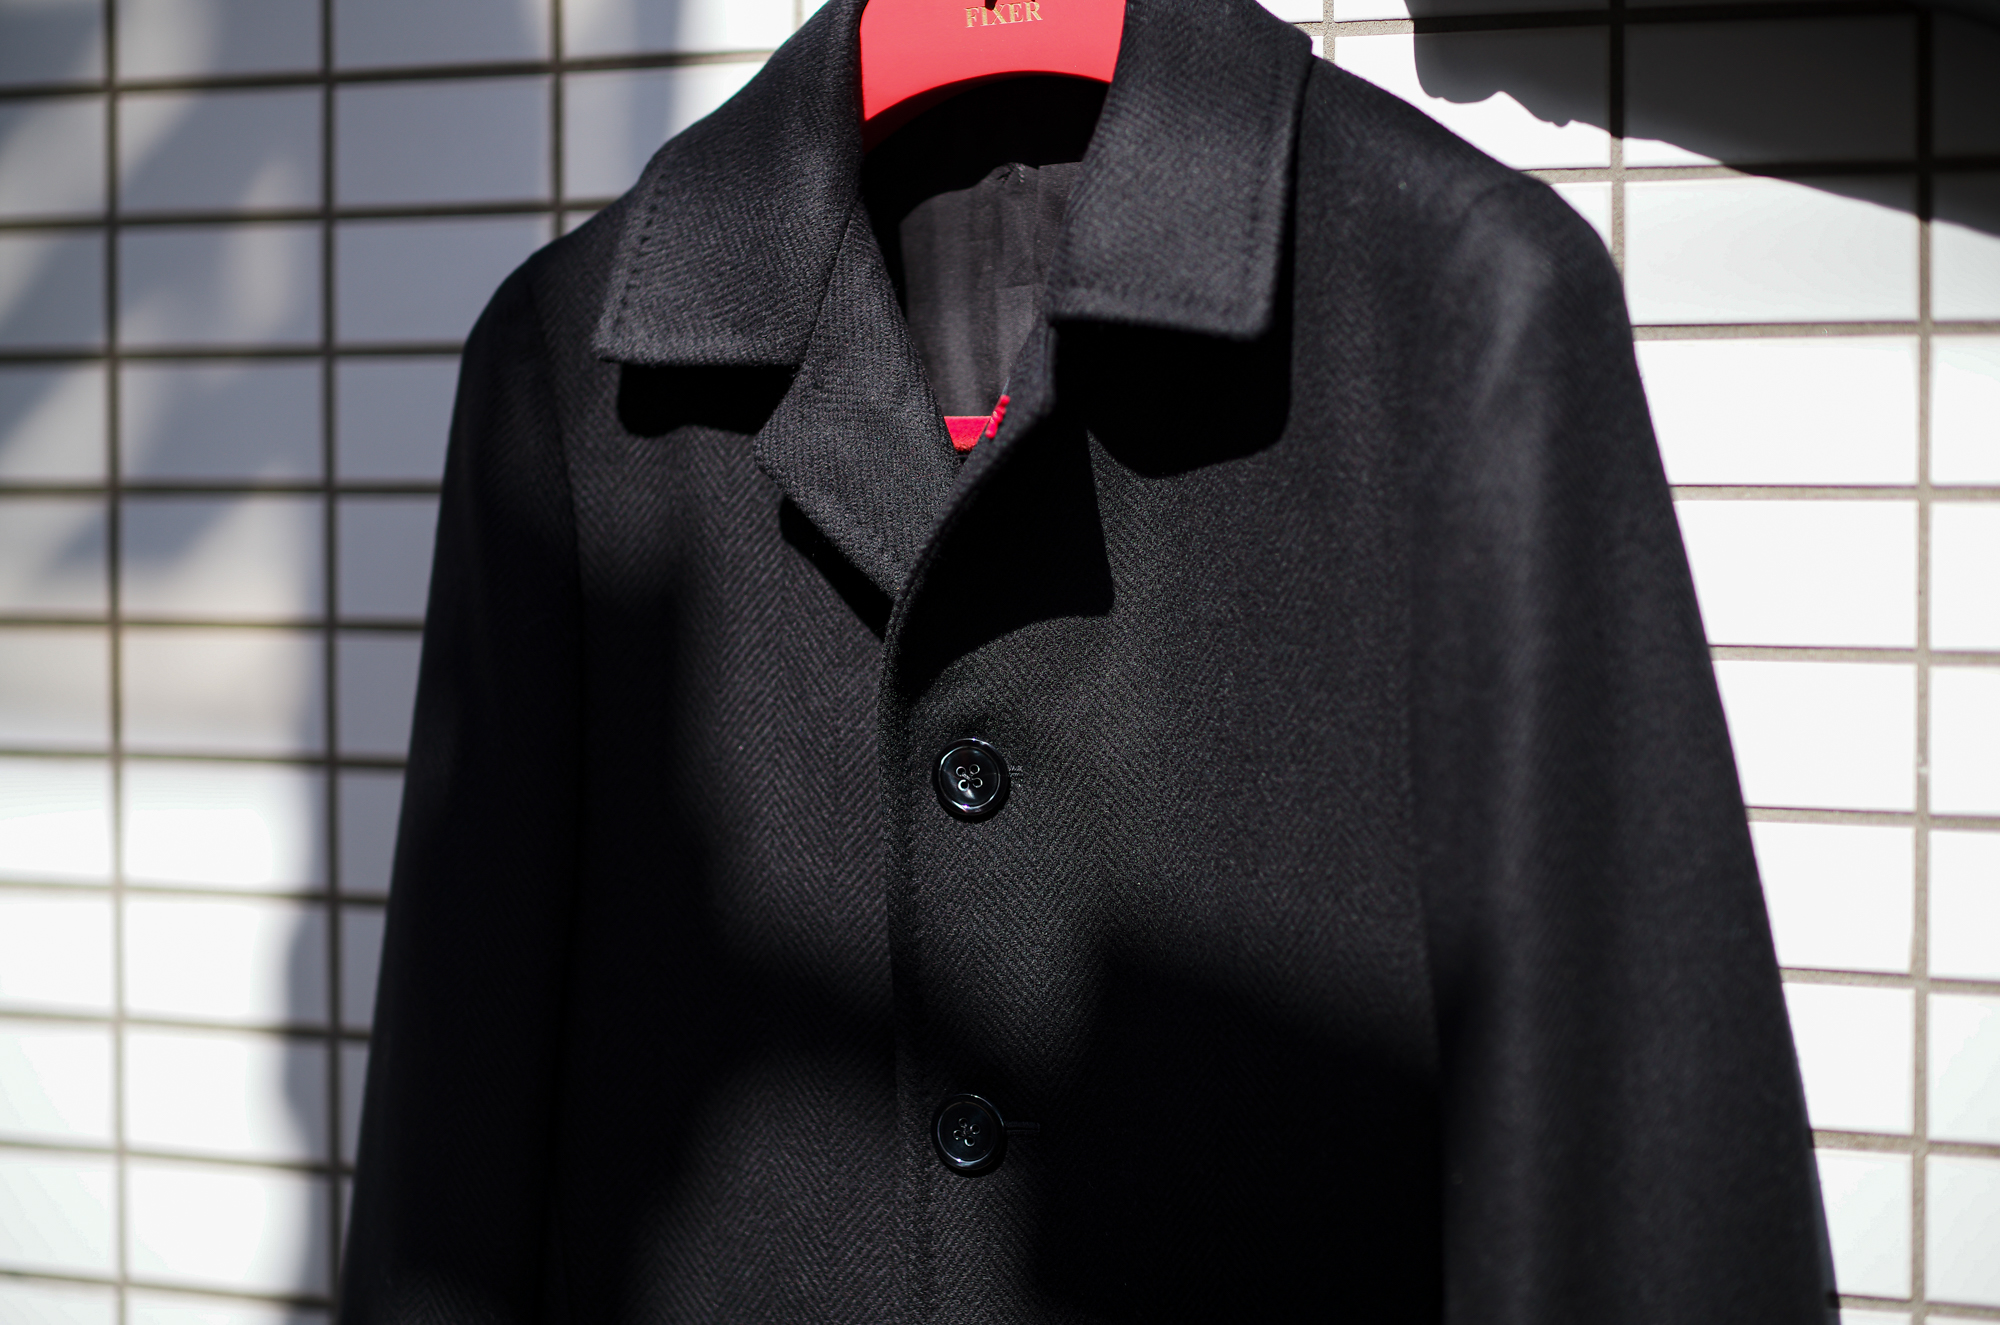 ISAIA "MADE TO MEASURE" CAPPOTTO "SCABAL BA191/990 WOOL" BLACK 2024 イザイア カポット スキャバル カーコート ブラック 愛知　名古屋 Alto e Diritto altoediritto アルトエデリット